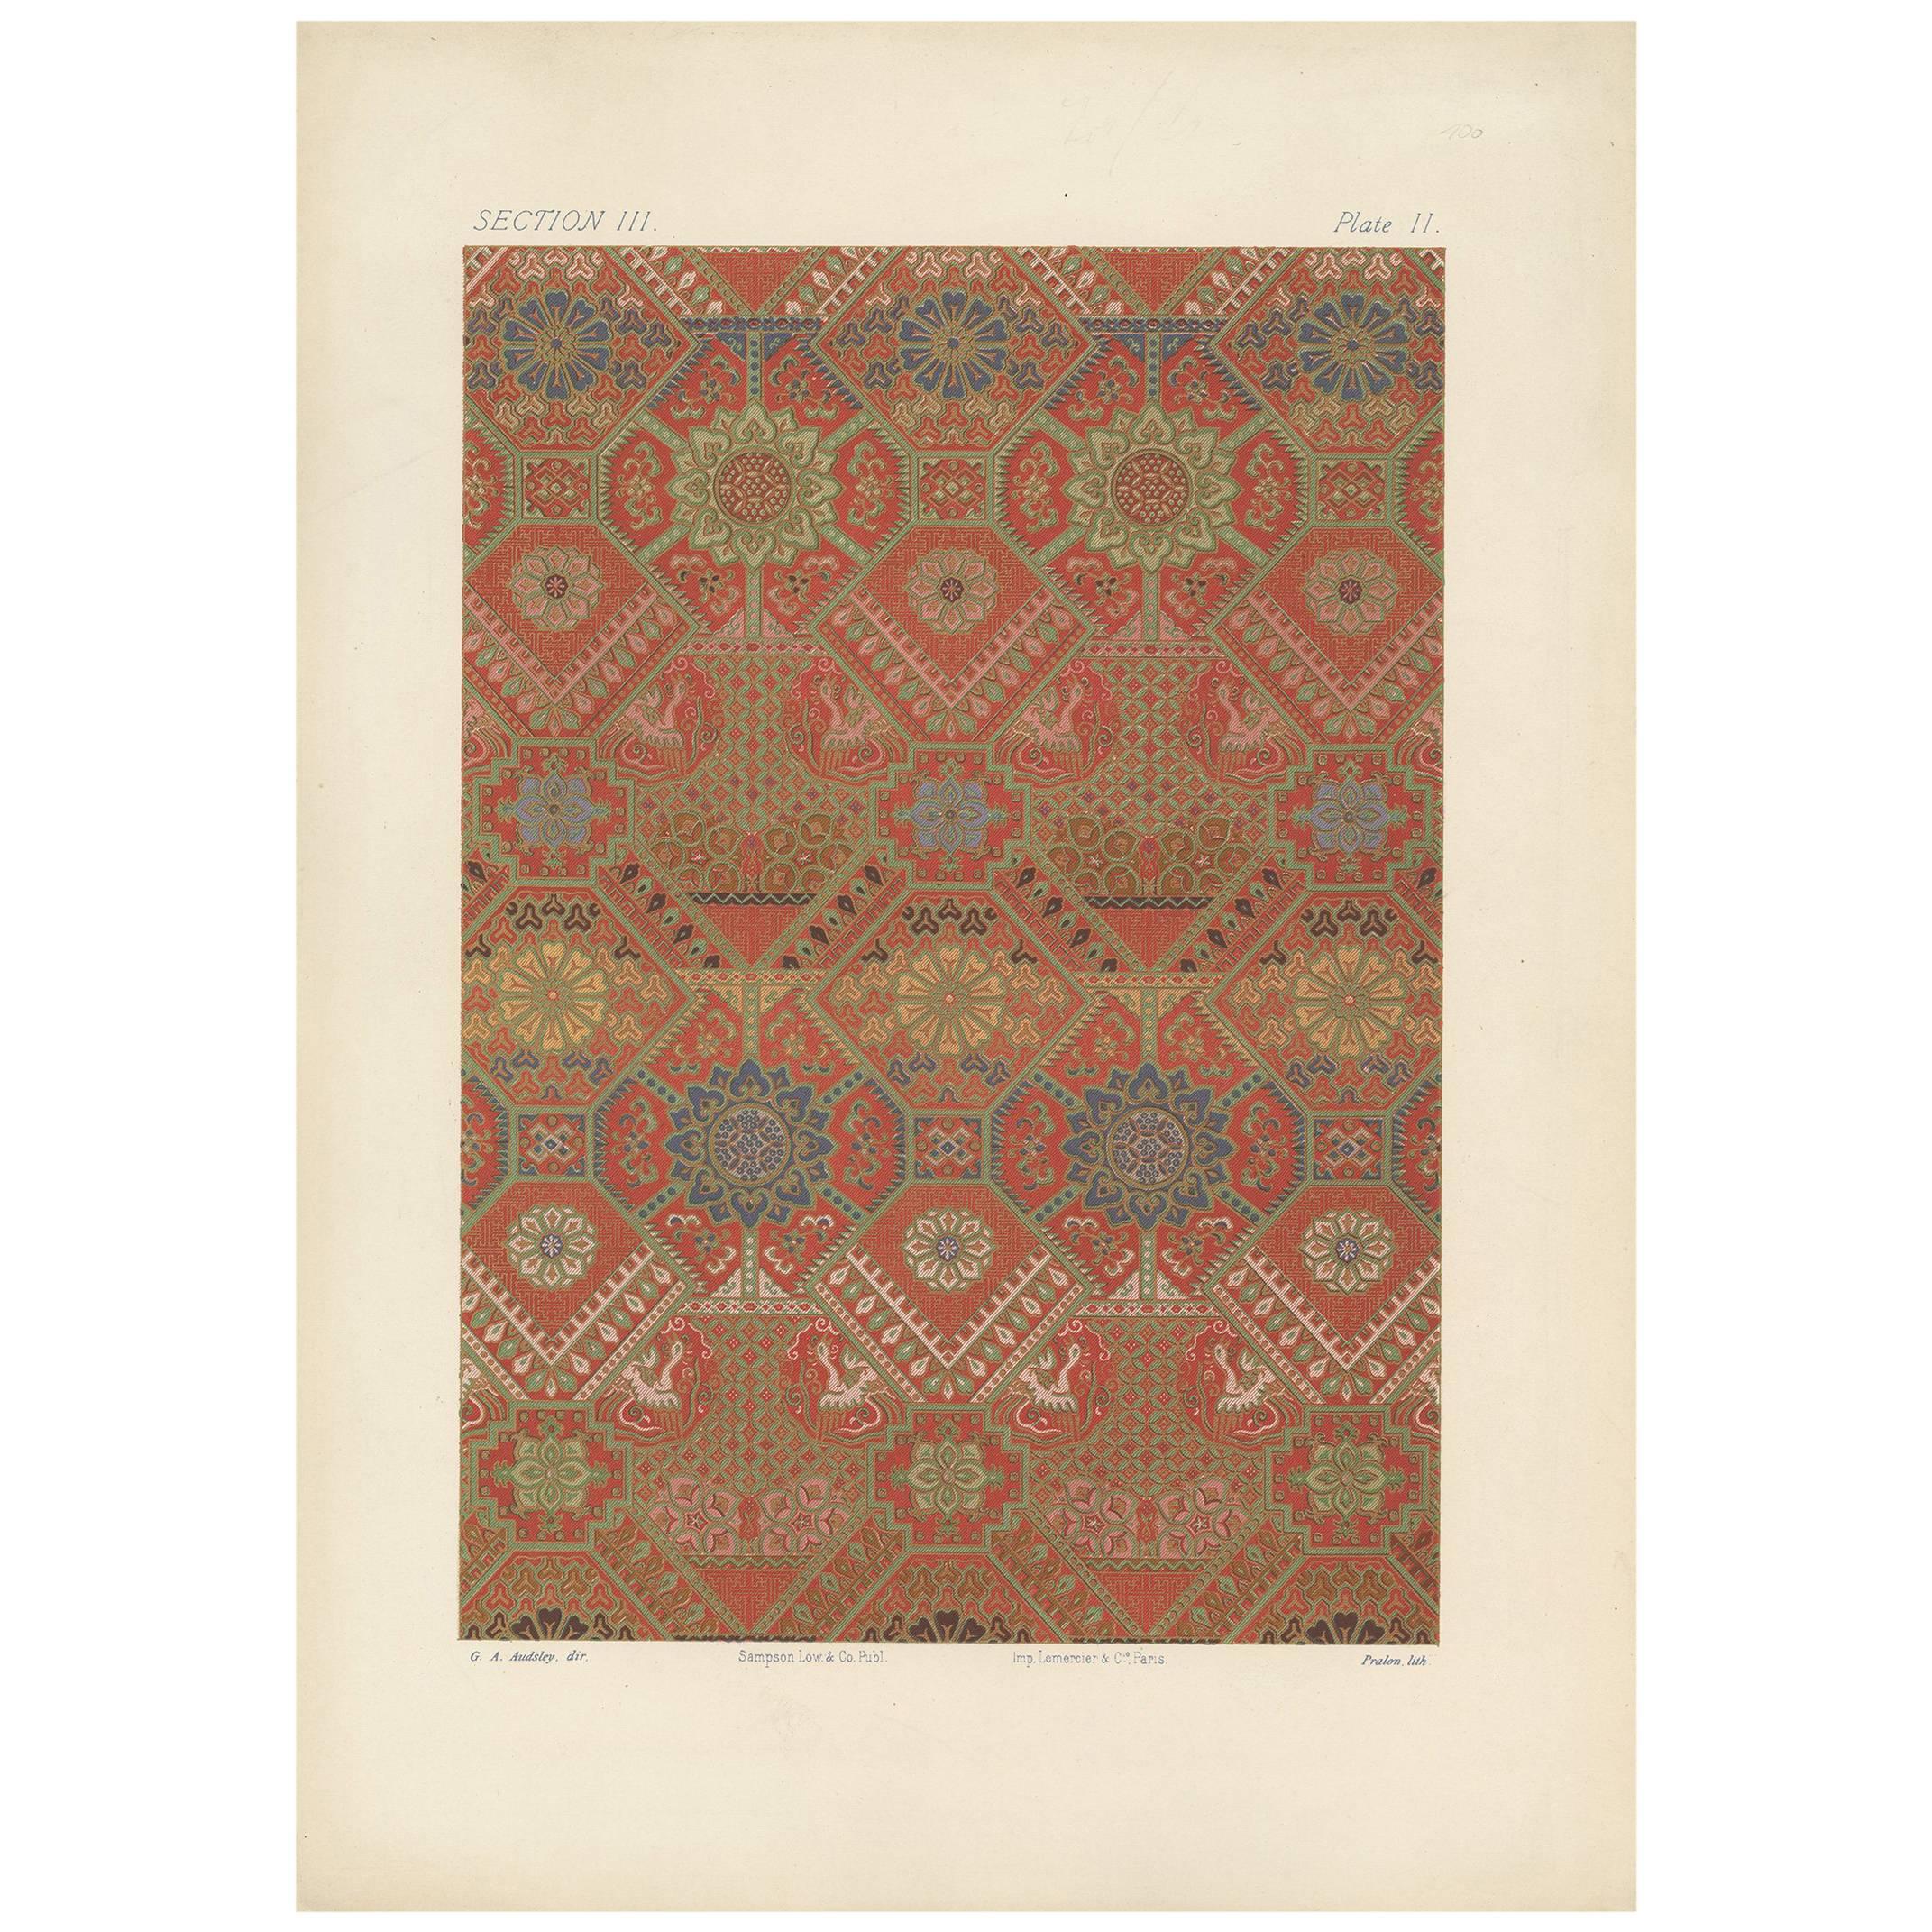 Antique Print of Silk and Gold Fabrics II 'Japan' by G. Audsley, 1882